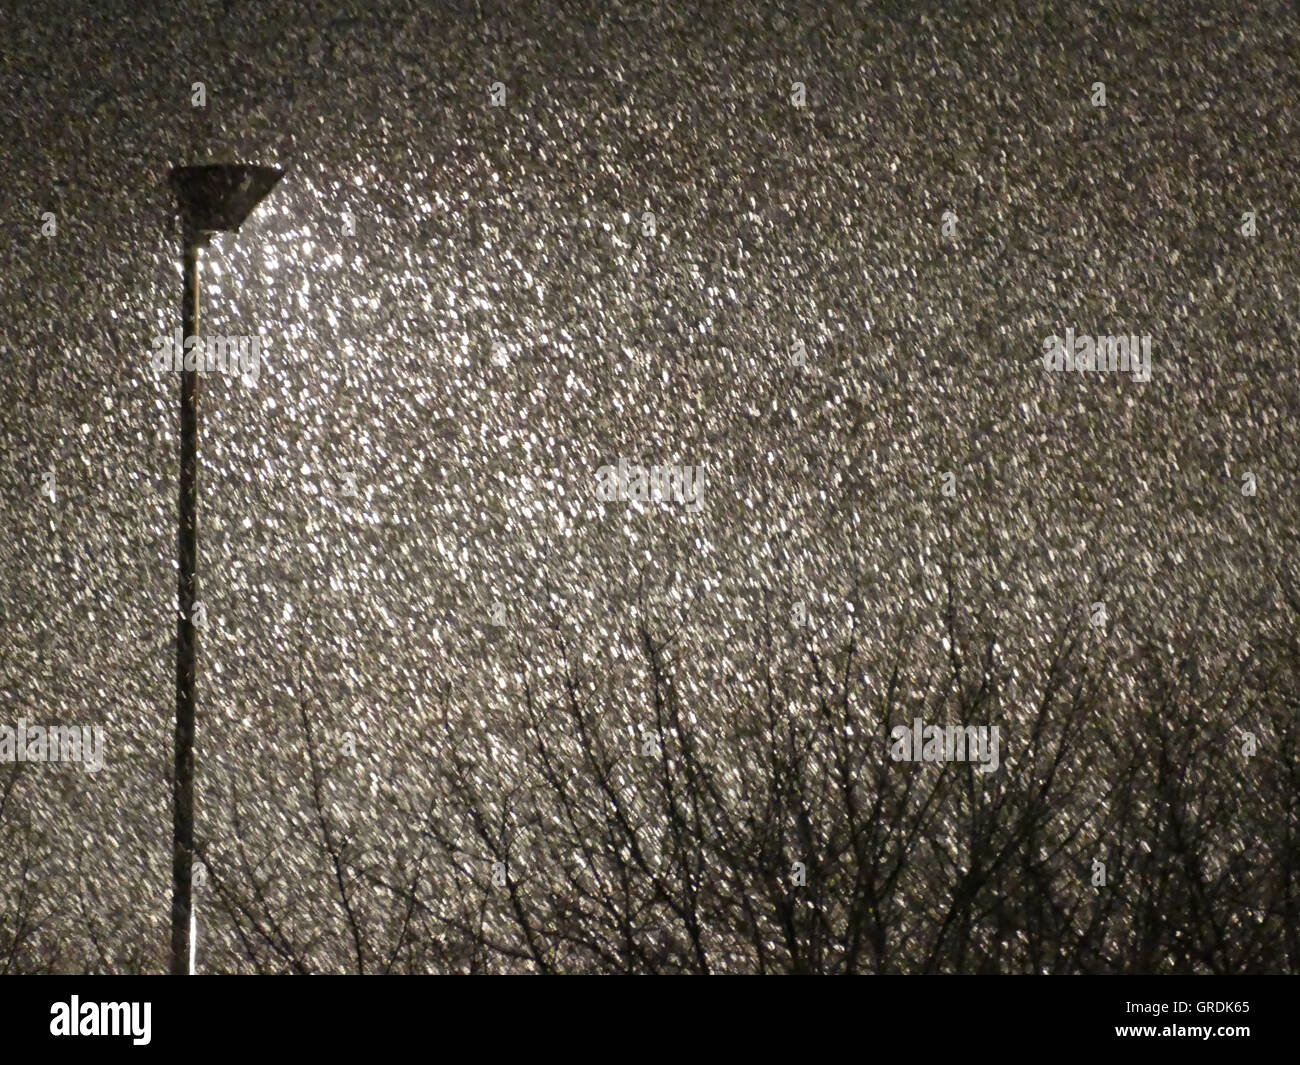 Snowflakes Dance In Front Of Floodlights At Night Stock Photo